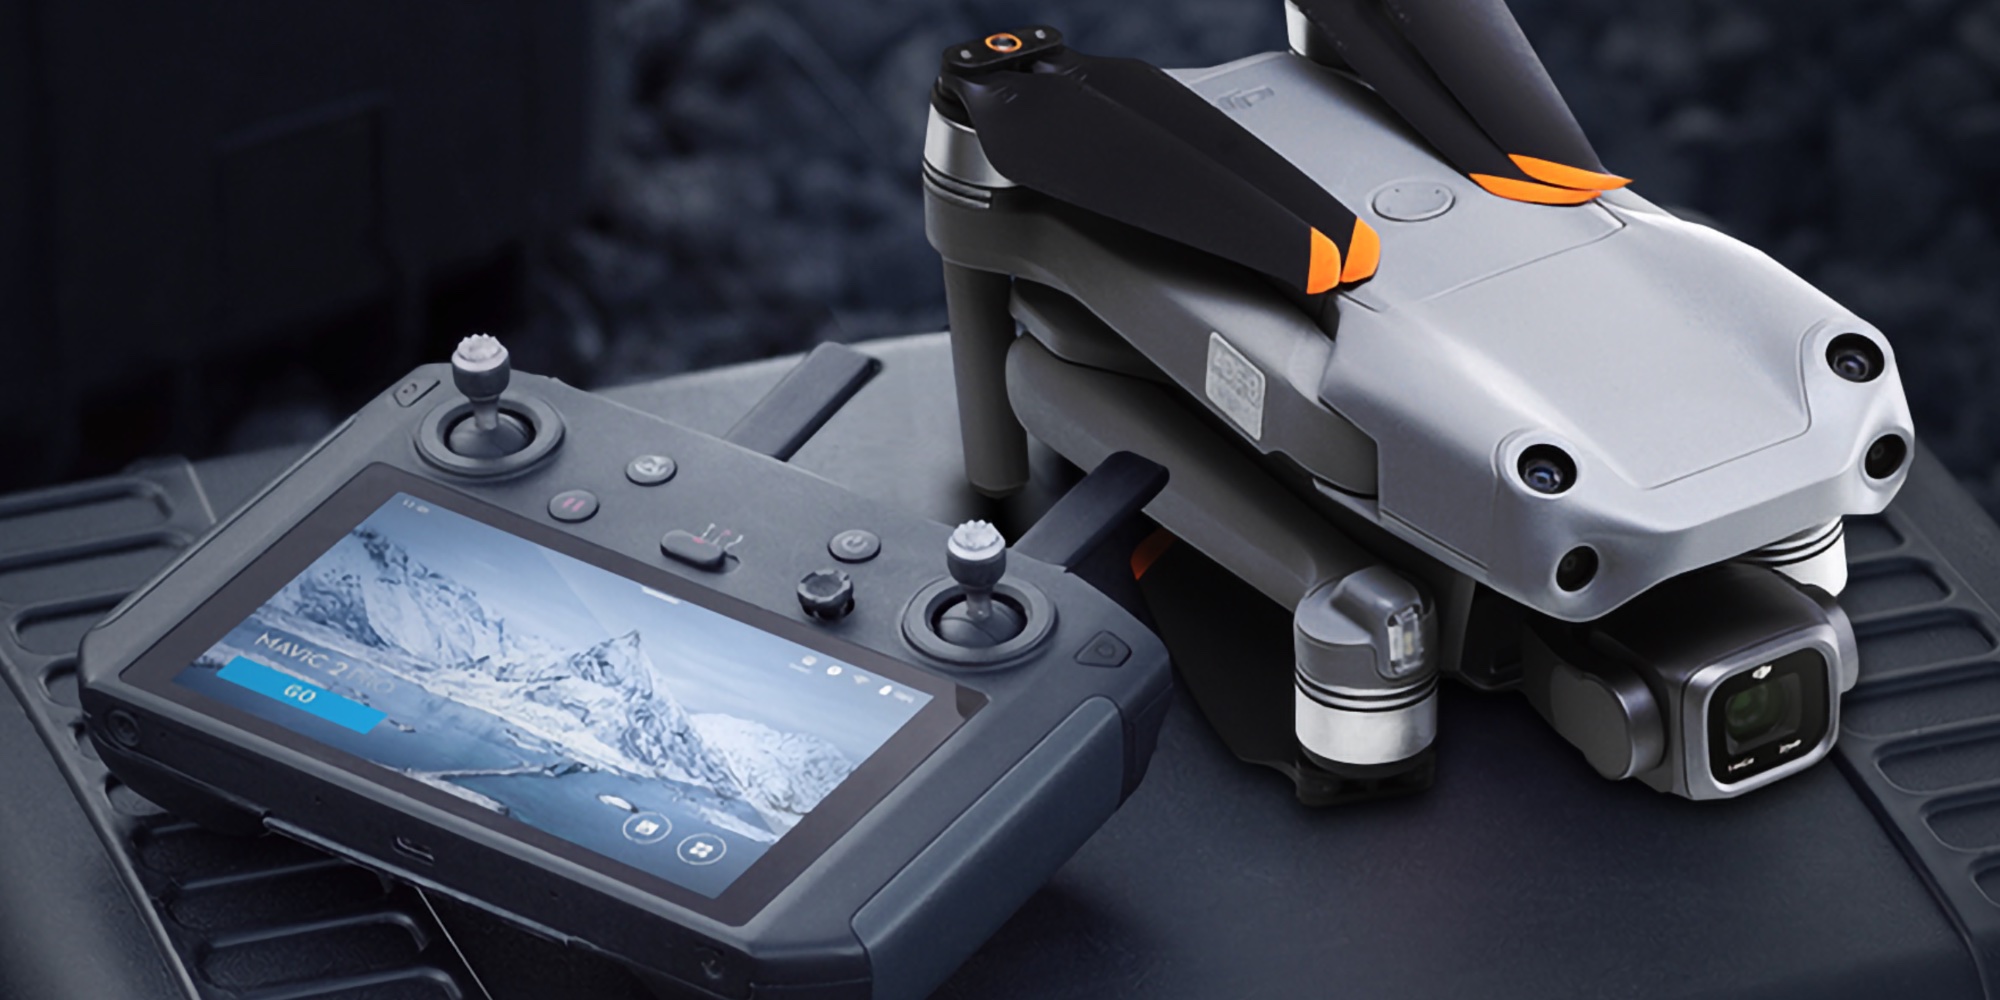 Save $250 on DJI's Air 2S folding drone with bundled Smart Controller